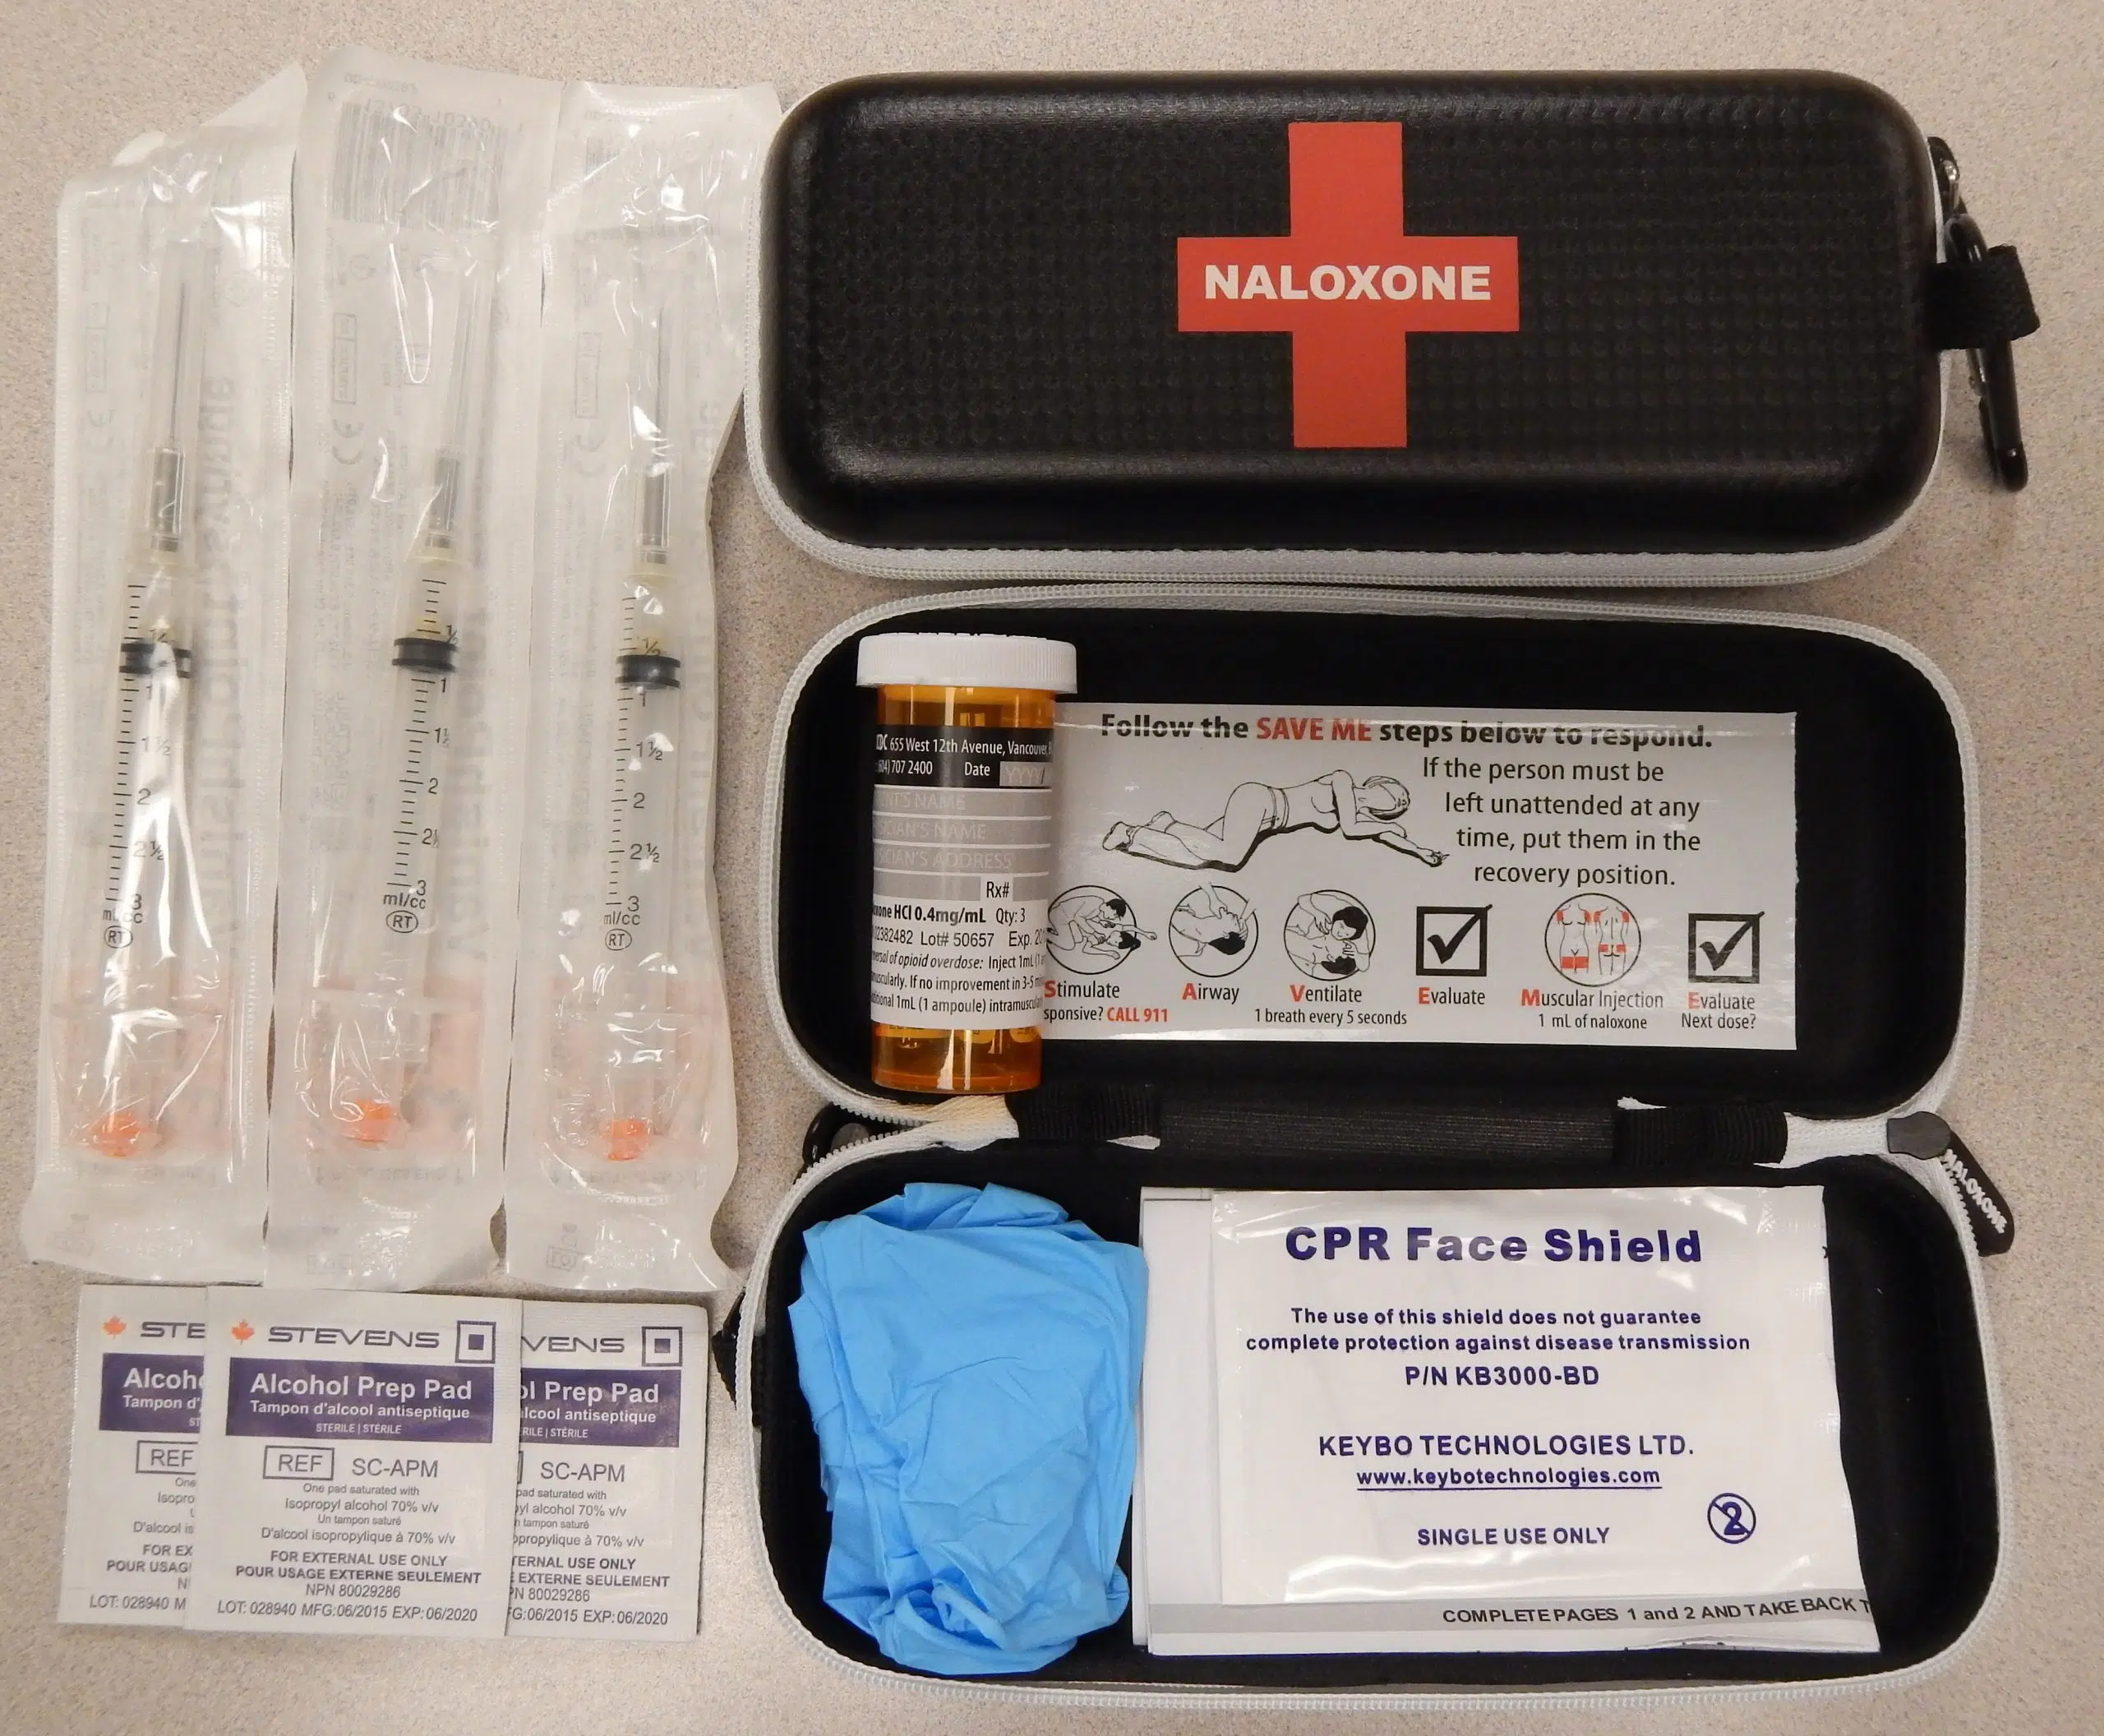 Up to five times more naloxone needed to reverse a fentanyl overdose, BC paramedic says